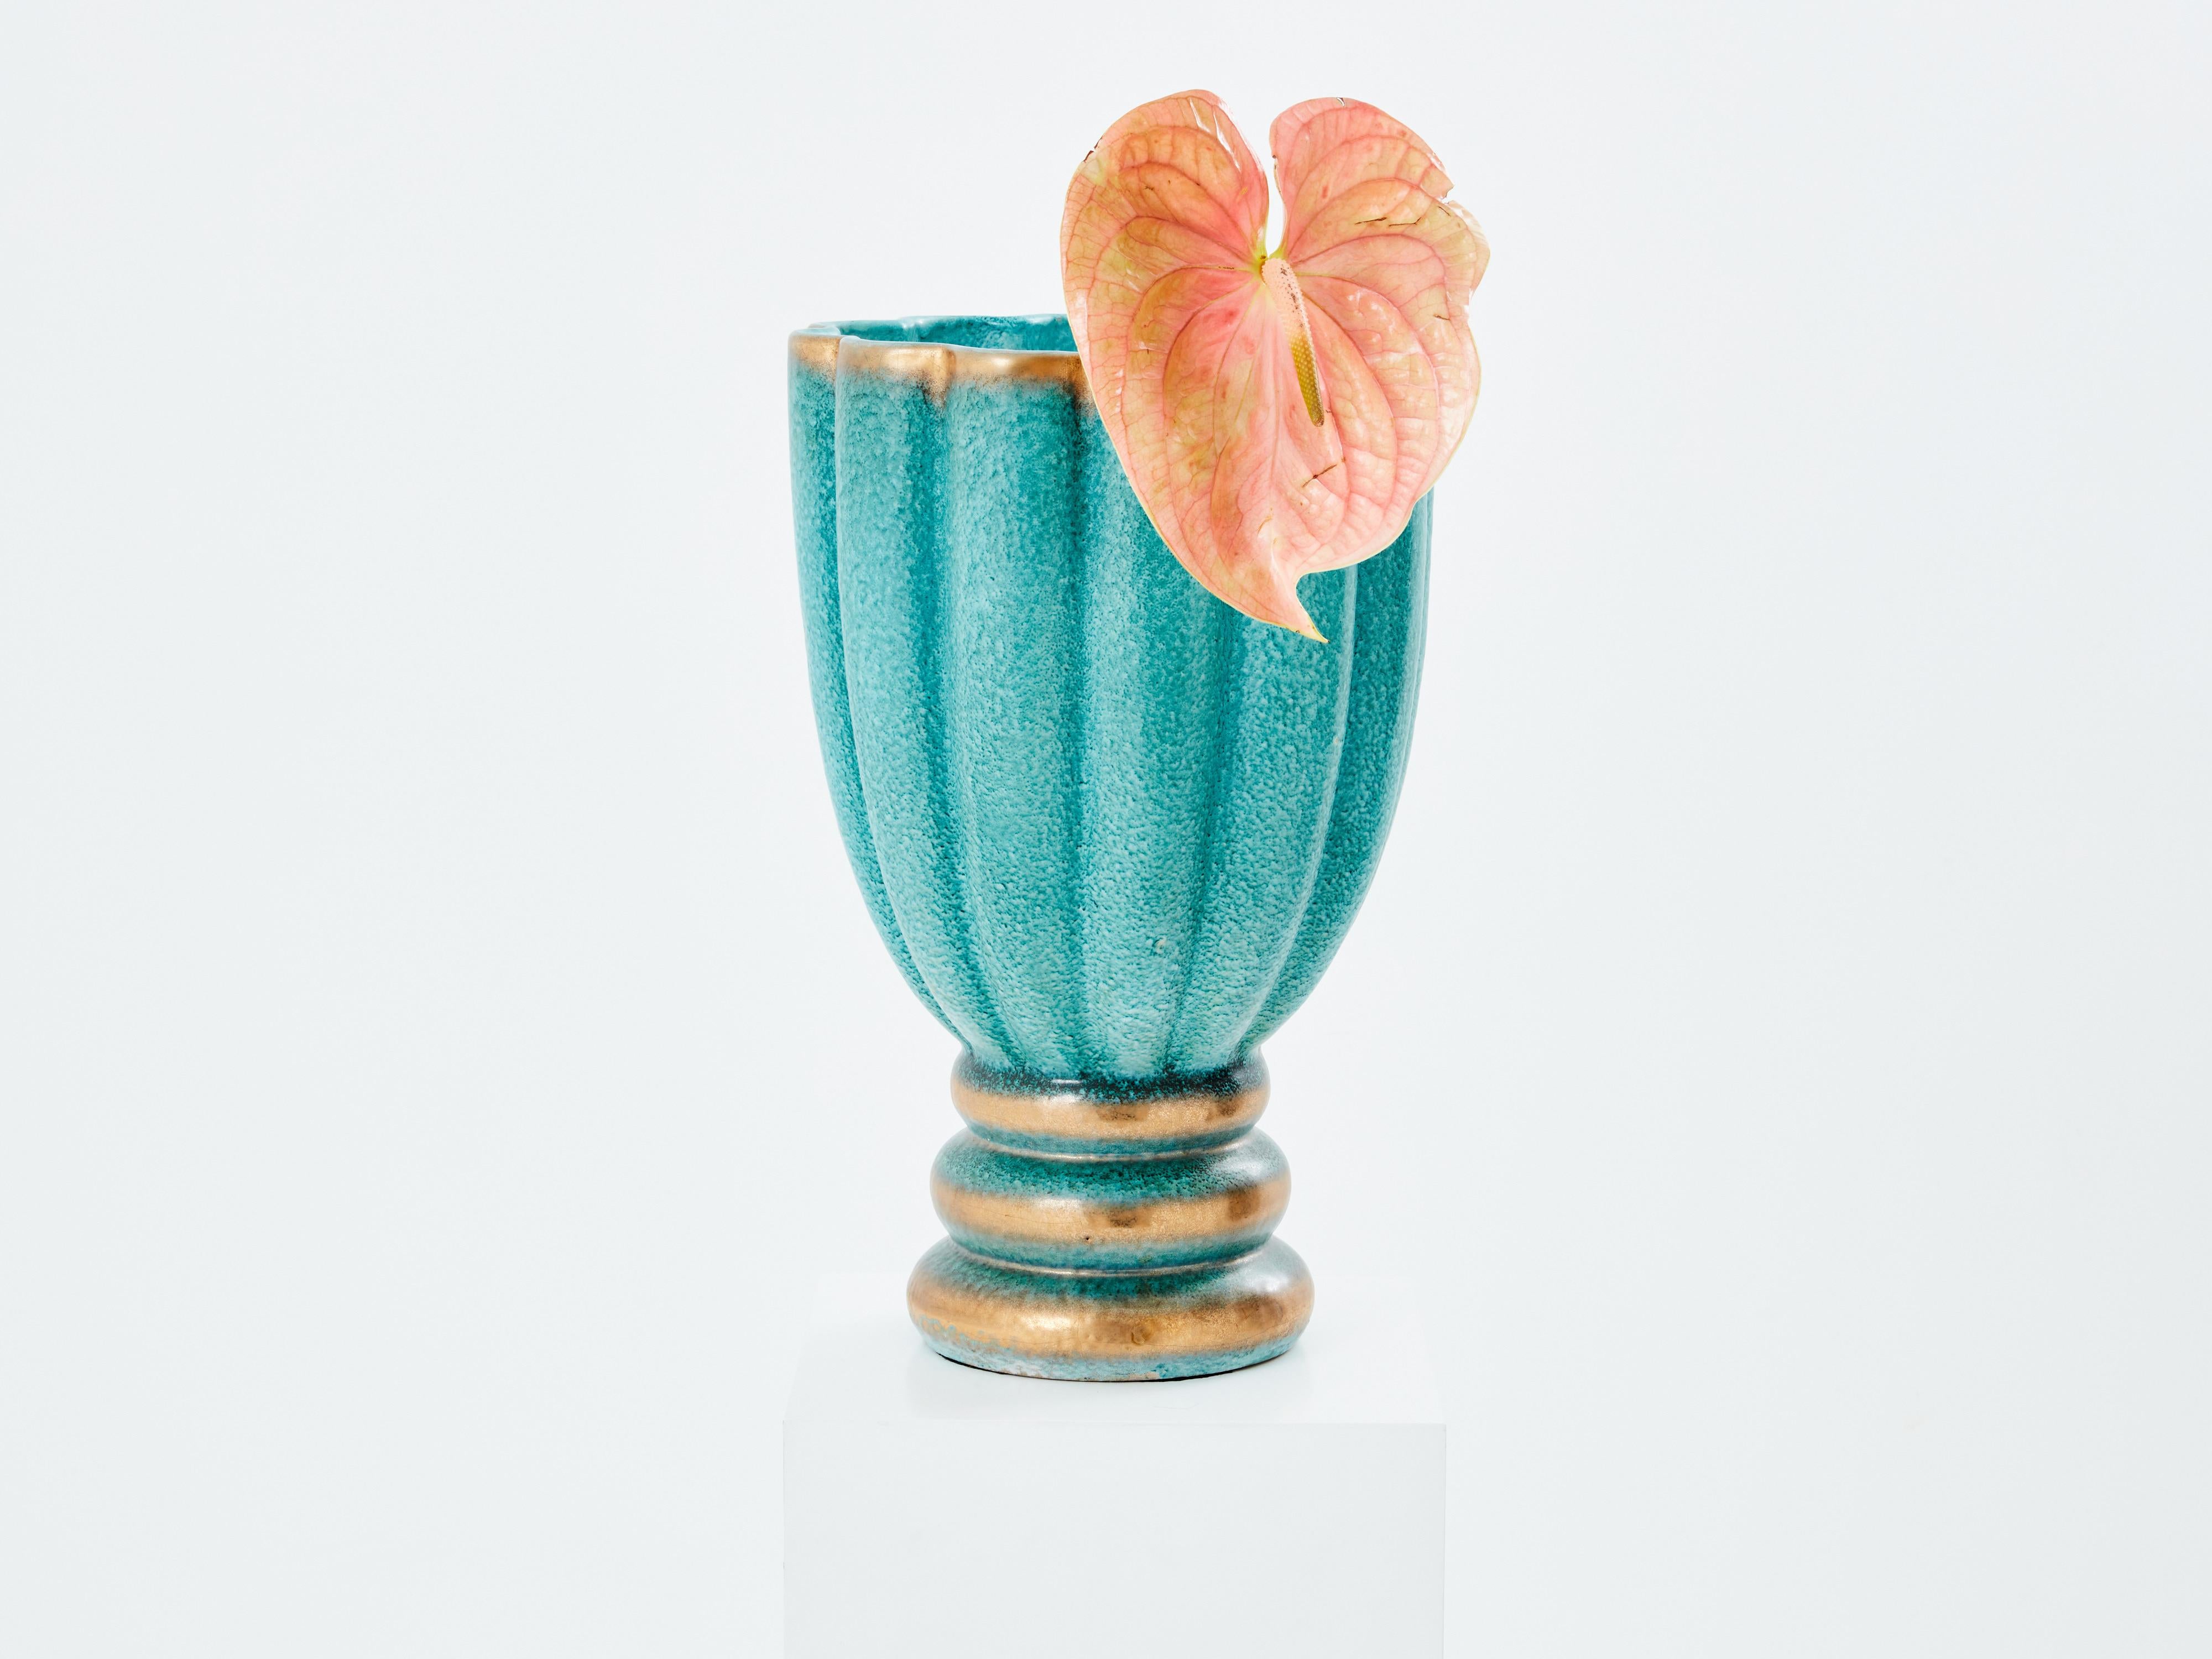 This green-blue vase, crafted by Italian ceramist Gabriele Bicchioni in the 1930s, stands out for its imposing size and Art Deco style. With its fluid curves, it epitomises a timeless testament to the excellence of Deruta ceramics. Under Gabriele